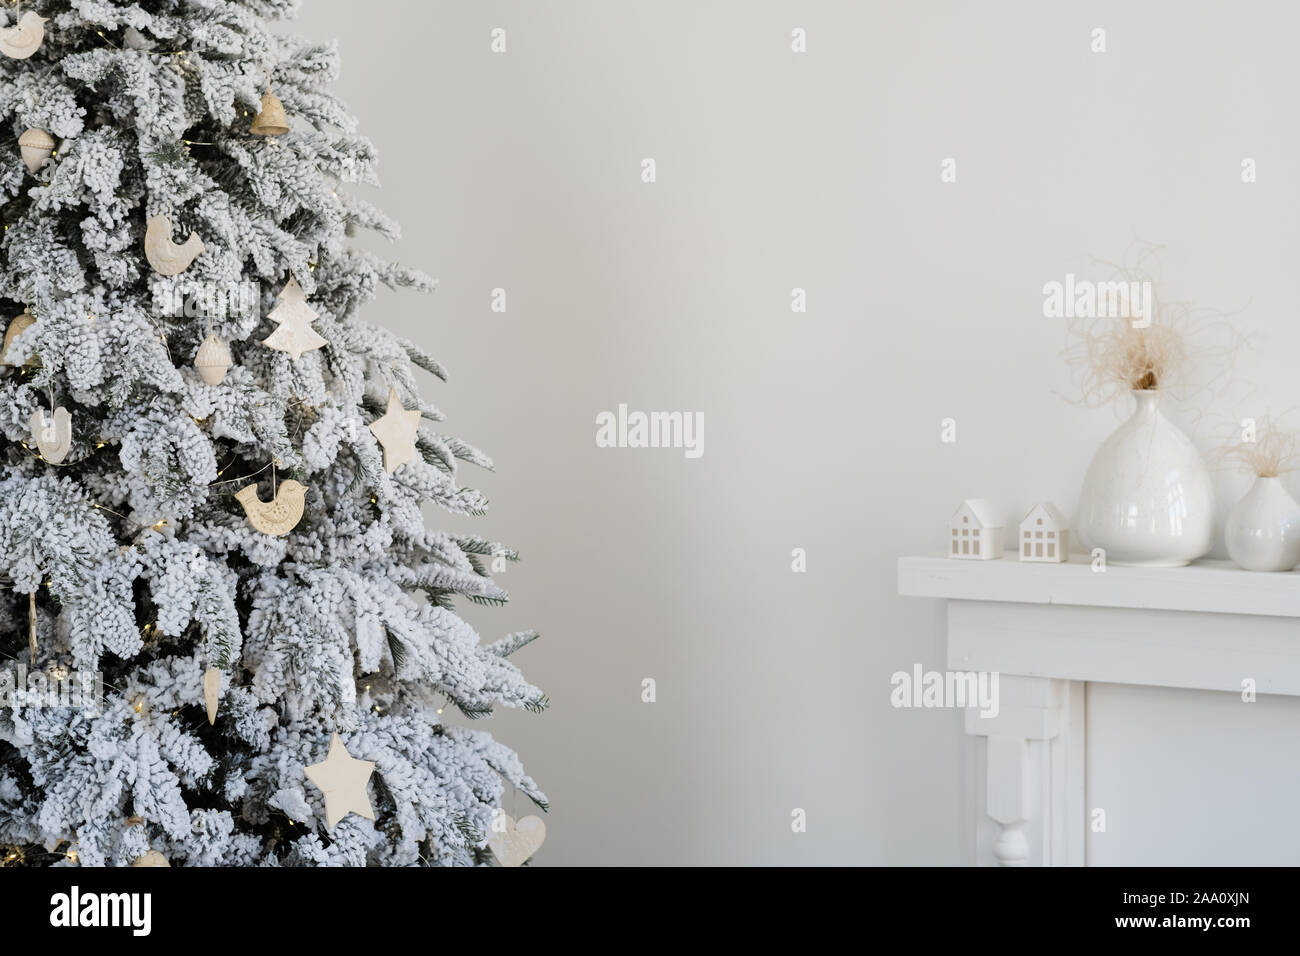 New Year's interior in bright colors. Christmas tree, toys, white fireplace. Stock Photo